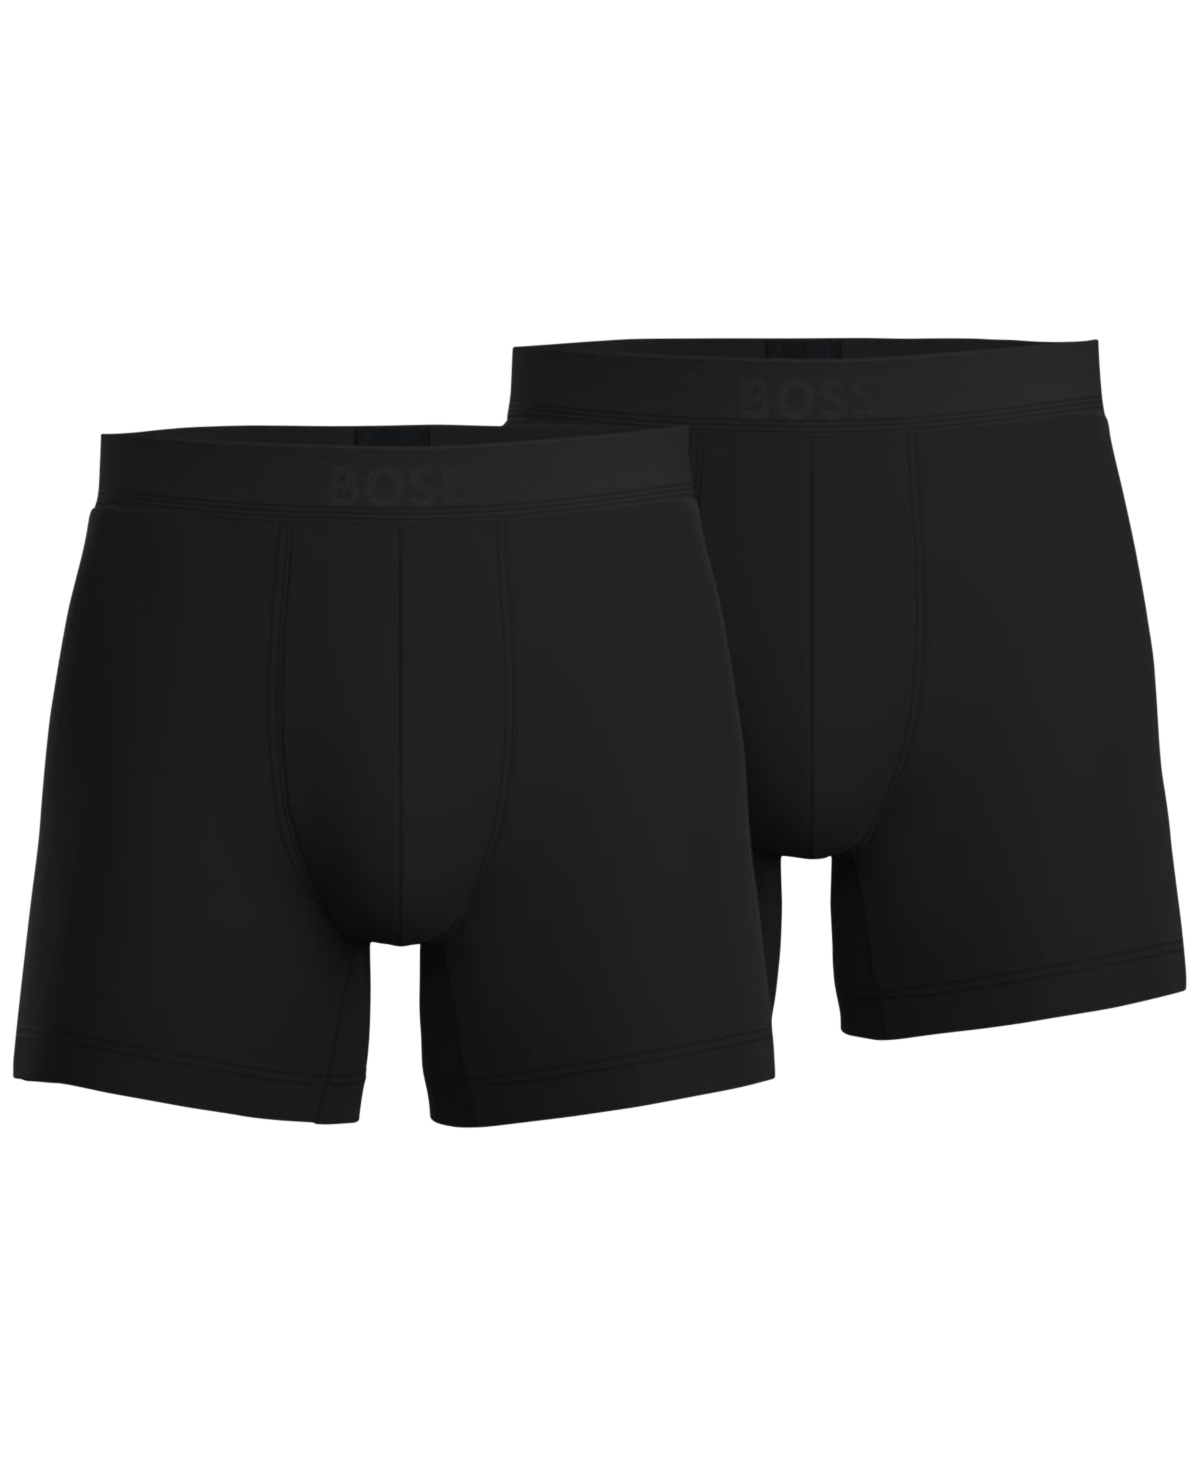 Boss by Hugo Boss Men's 2-Pk. UltraSoft Solid Execution Solid Boxer Briefs - Black